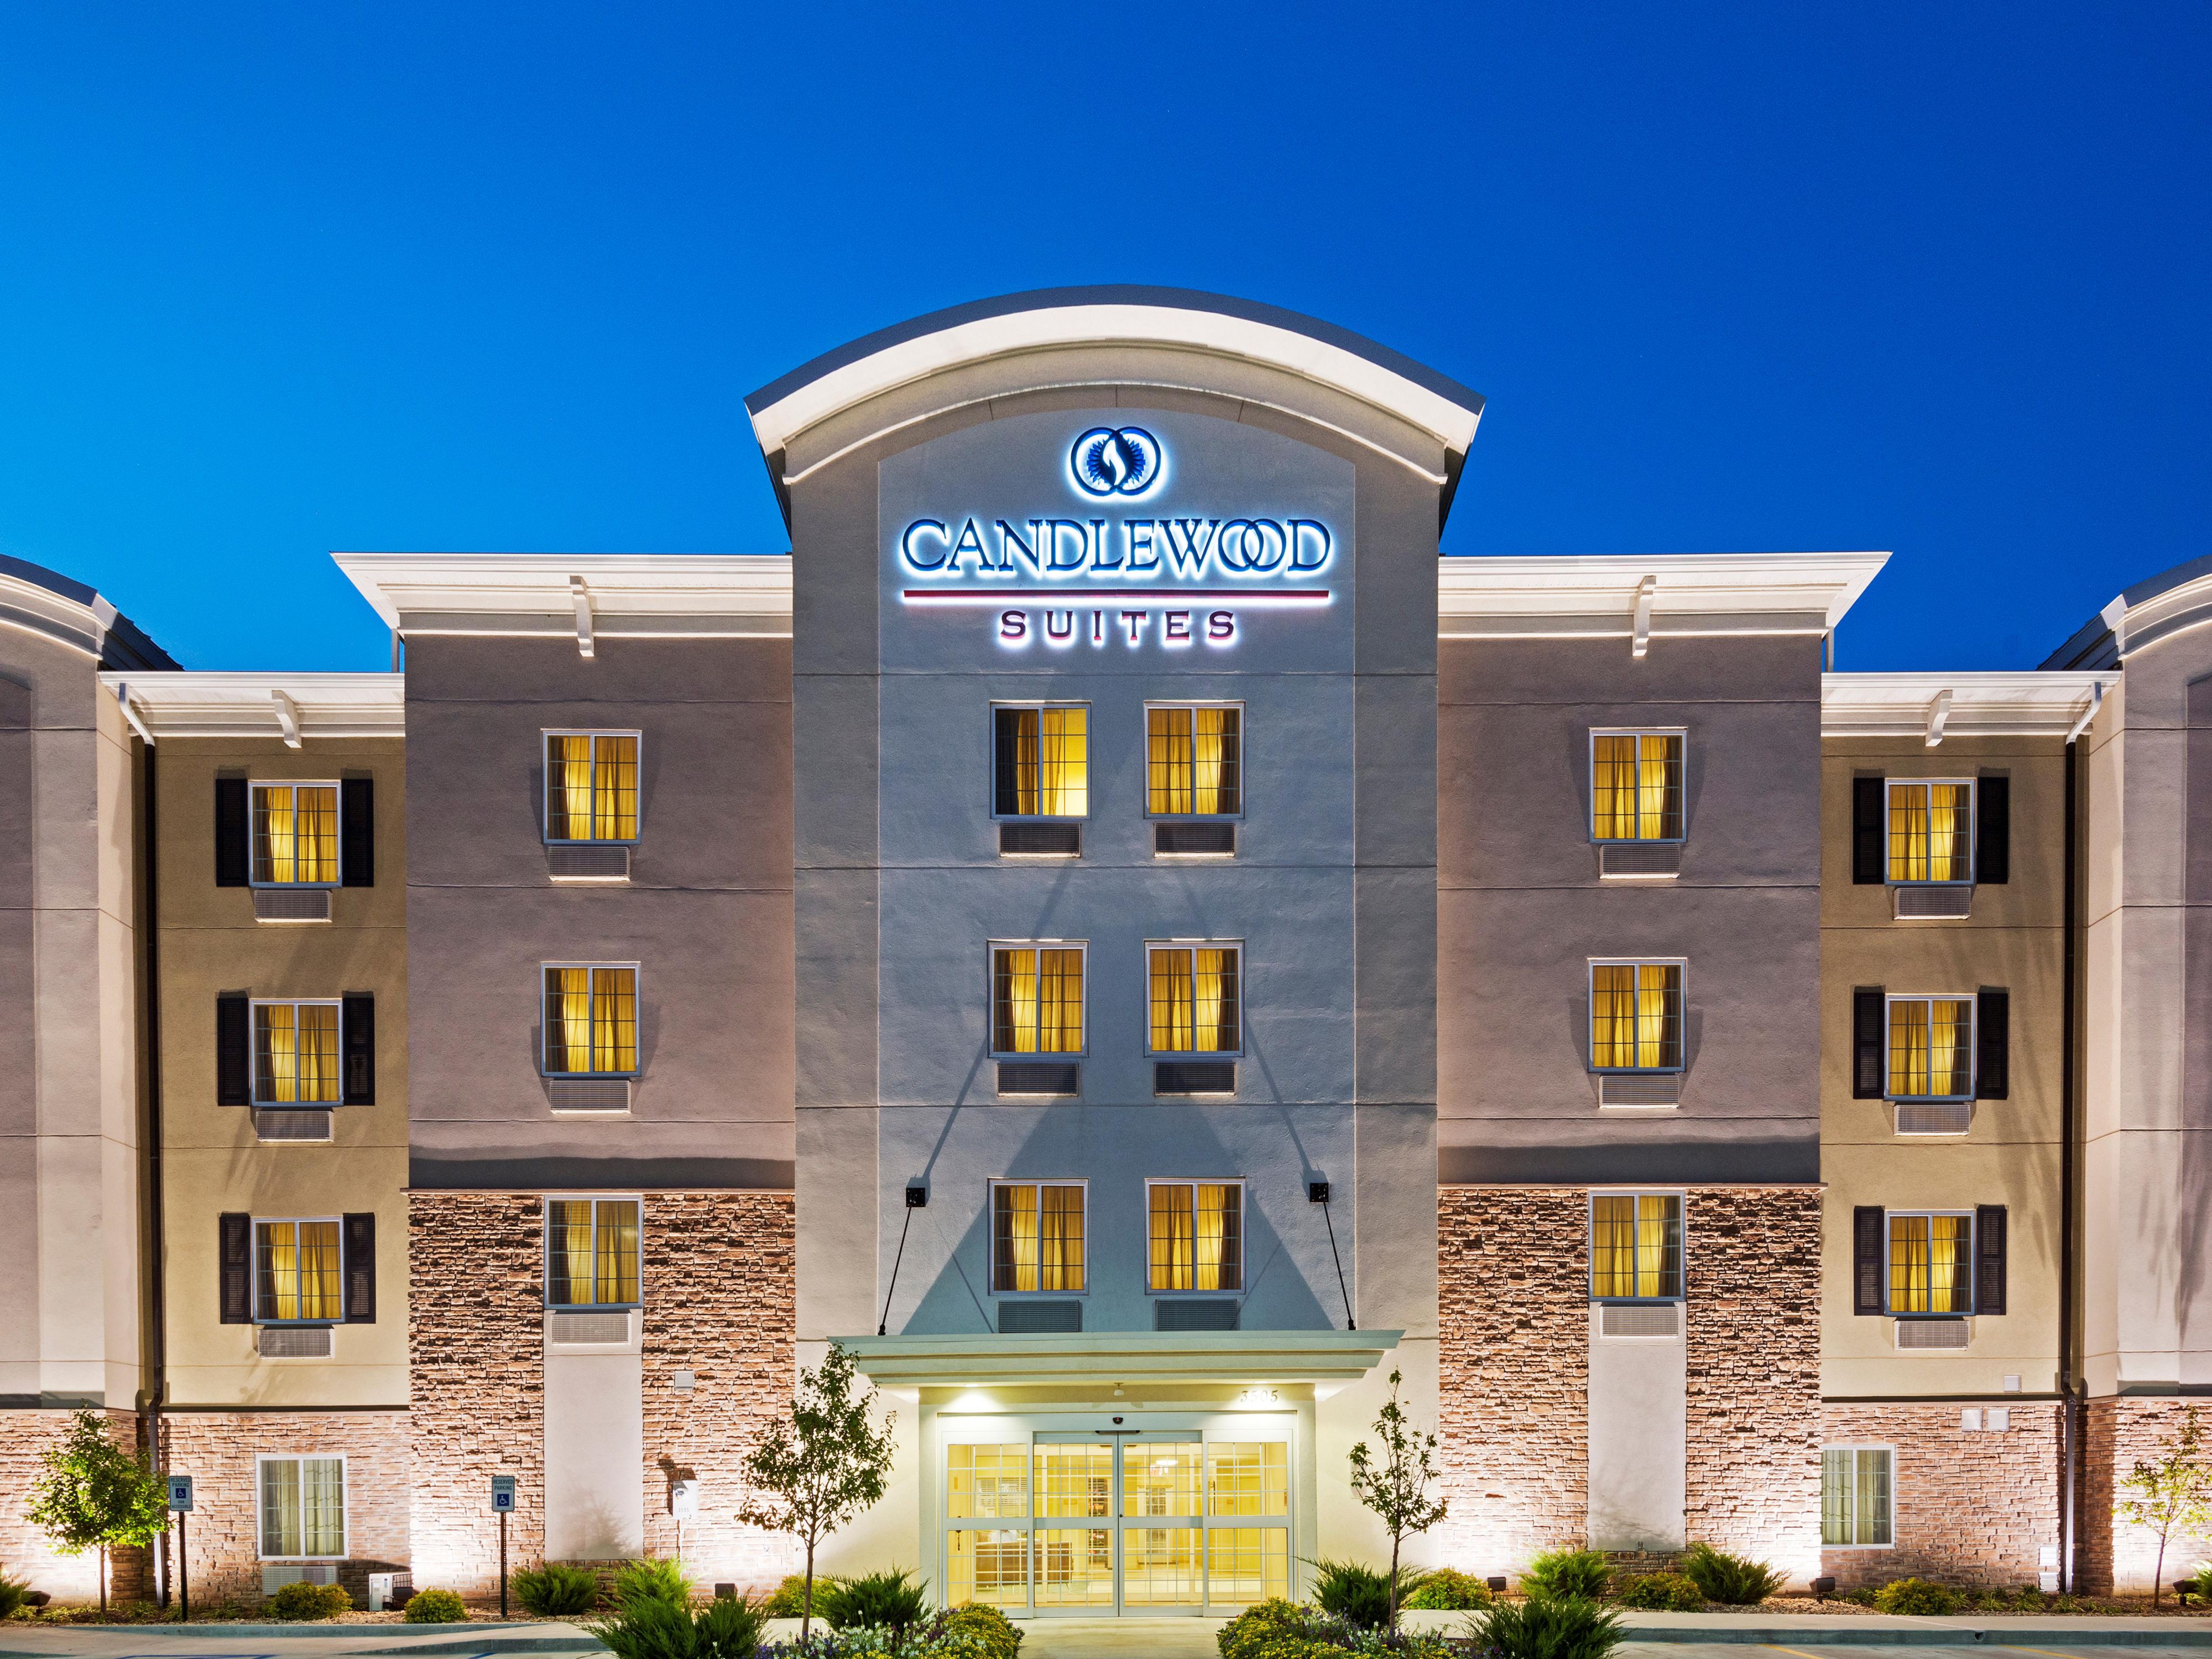 Pet-Friendly Hotels in Belle Vernon, PA | Candlewood Suites Belle Vernon